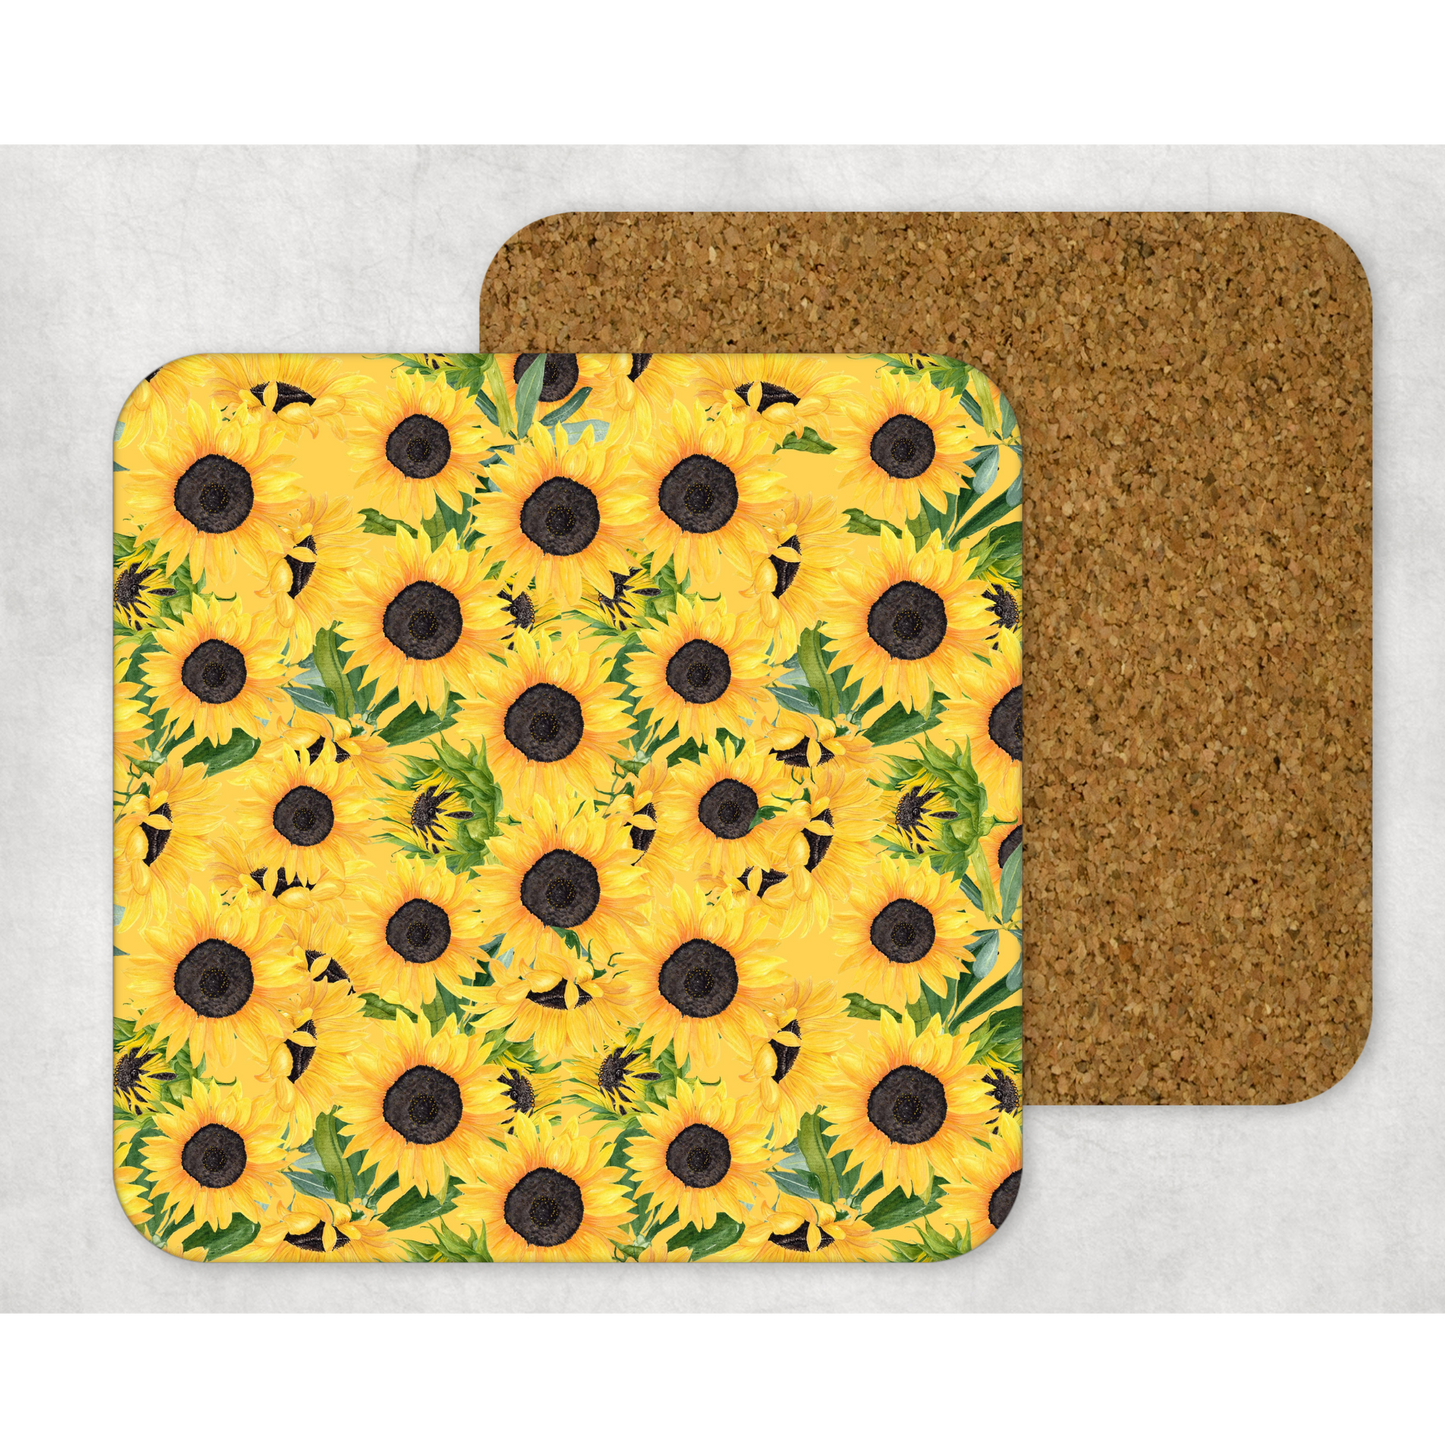 Beautifully Printed Sunflowers Wooden Coasters for Stylish Home Décor